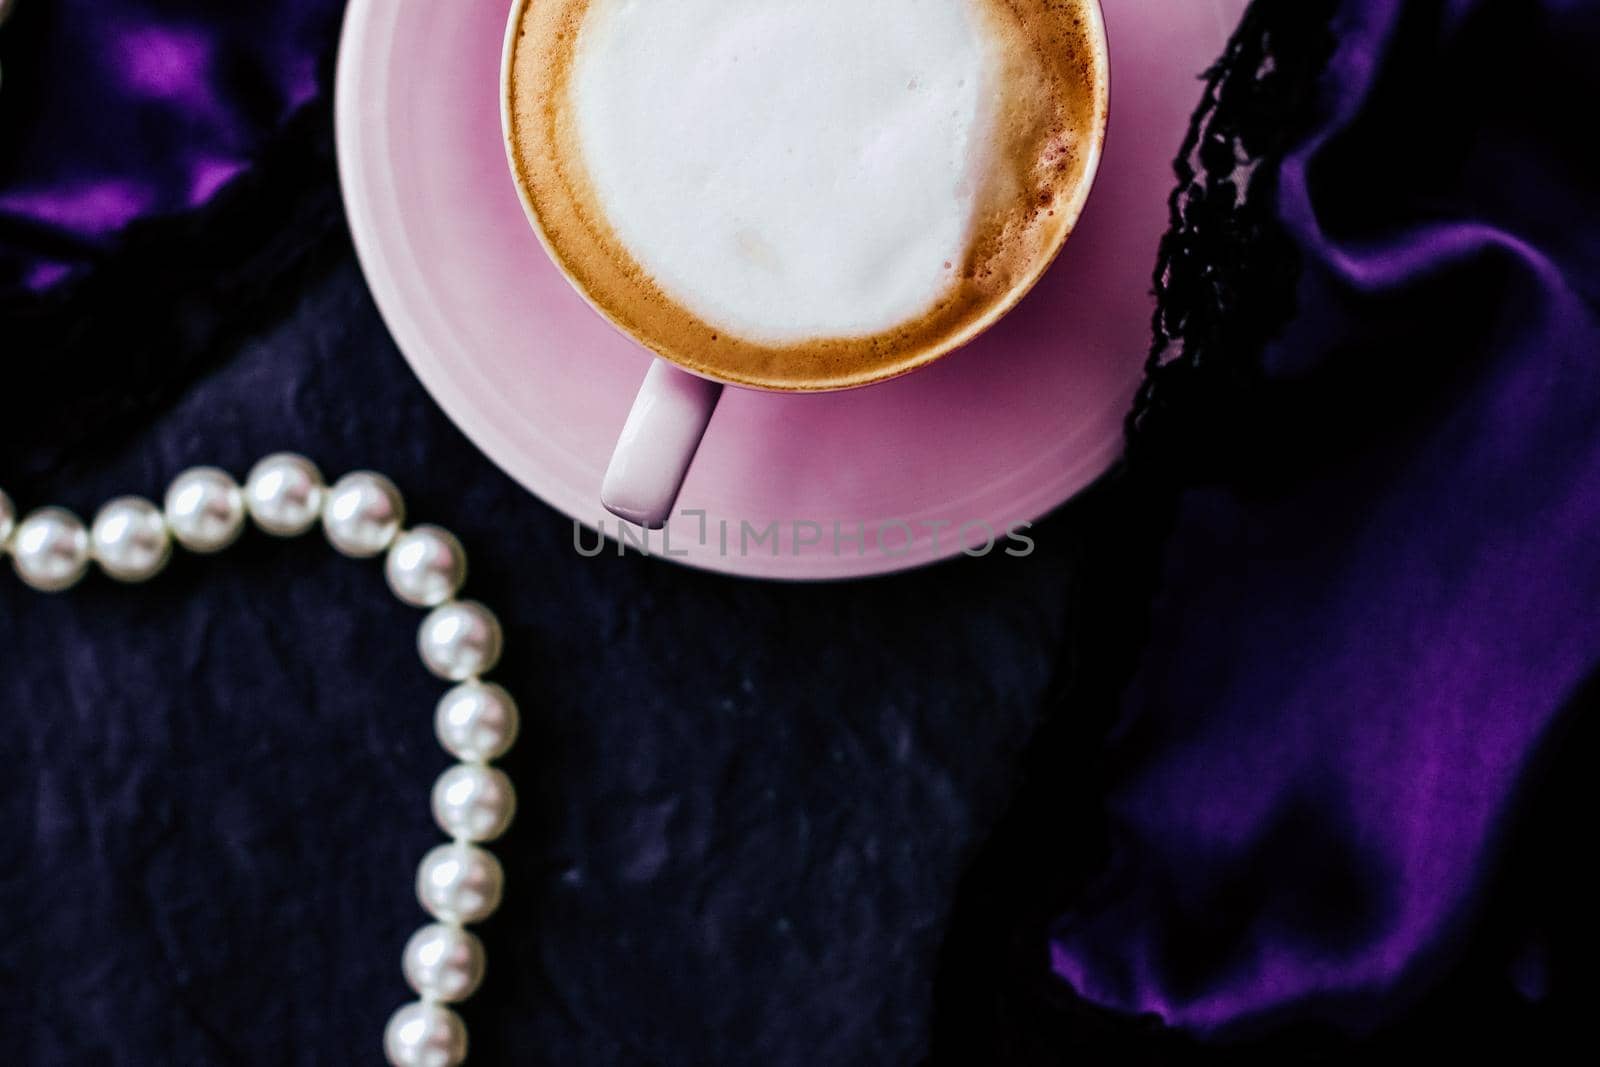 Cup of cappuccino for breakfast with satin and pearls jewellery background, organic coffee with lactose free milk in parisian cafe for luxury vintage holiday brand by Anneleven